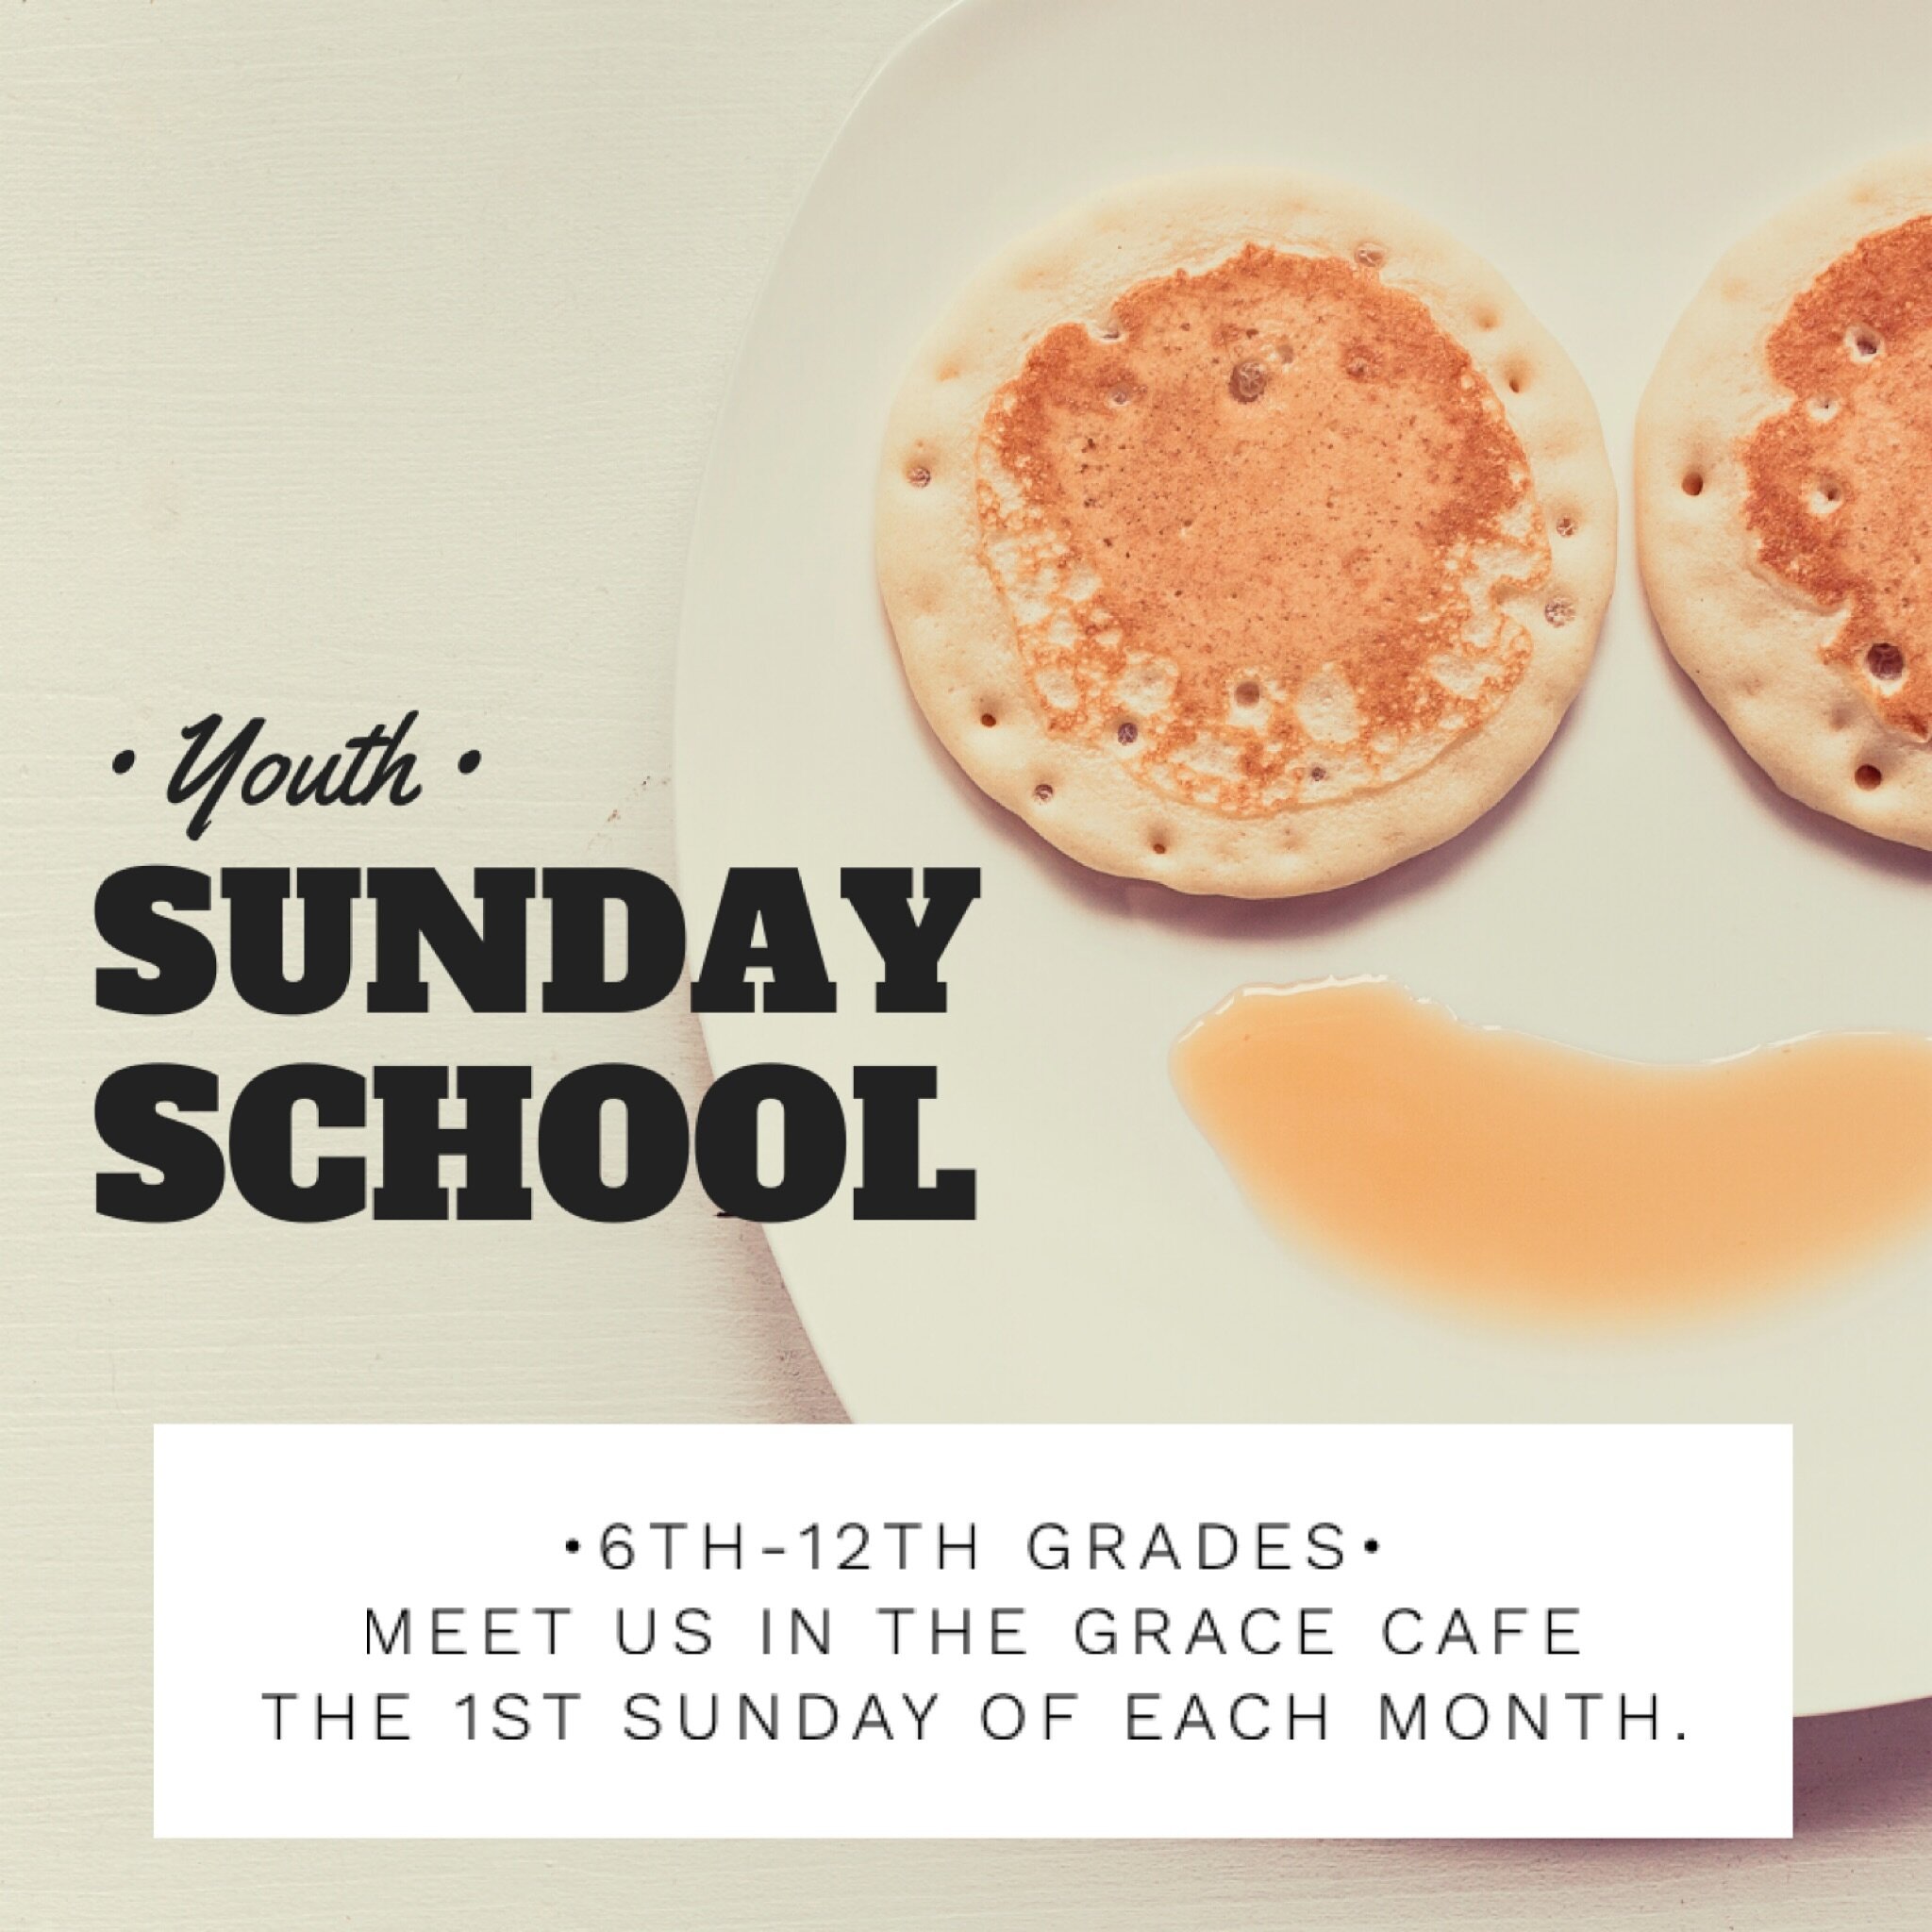 Hot breakfast! 🥞🍳☕️ The first Sunday of each month the Grace Cafe provides a hot breakfast for you and your family to enjoy. Open from 8:30-11am
On this day, Middle &amp; High school students gather for food and fellowship during their 10am Sunday 